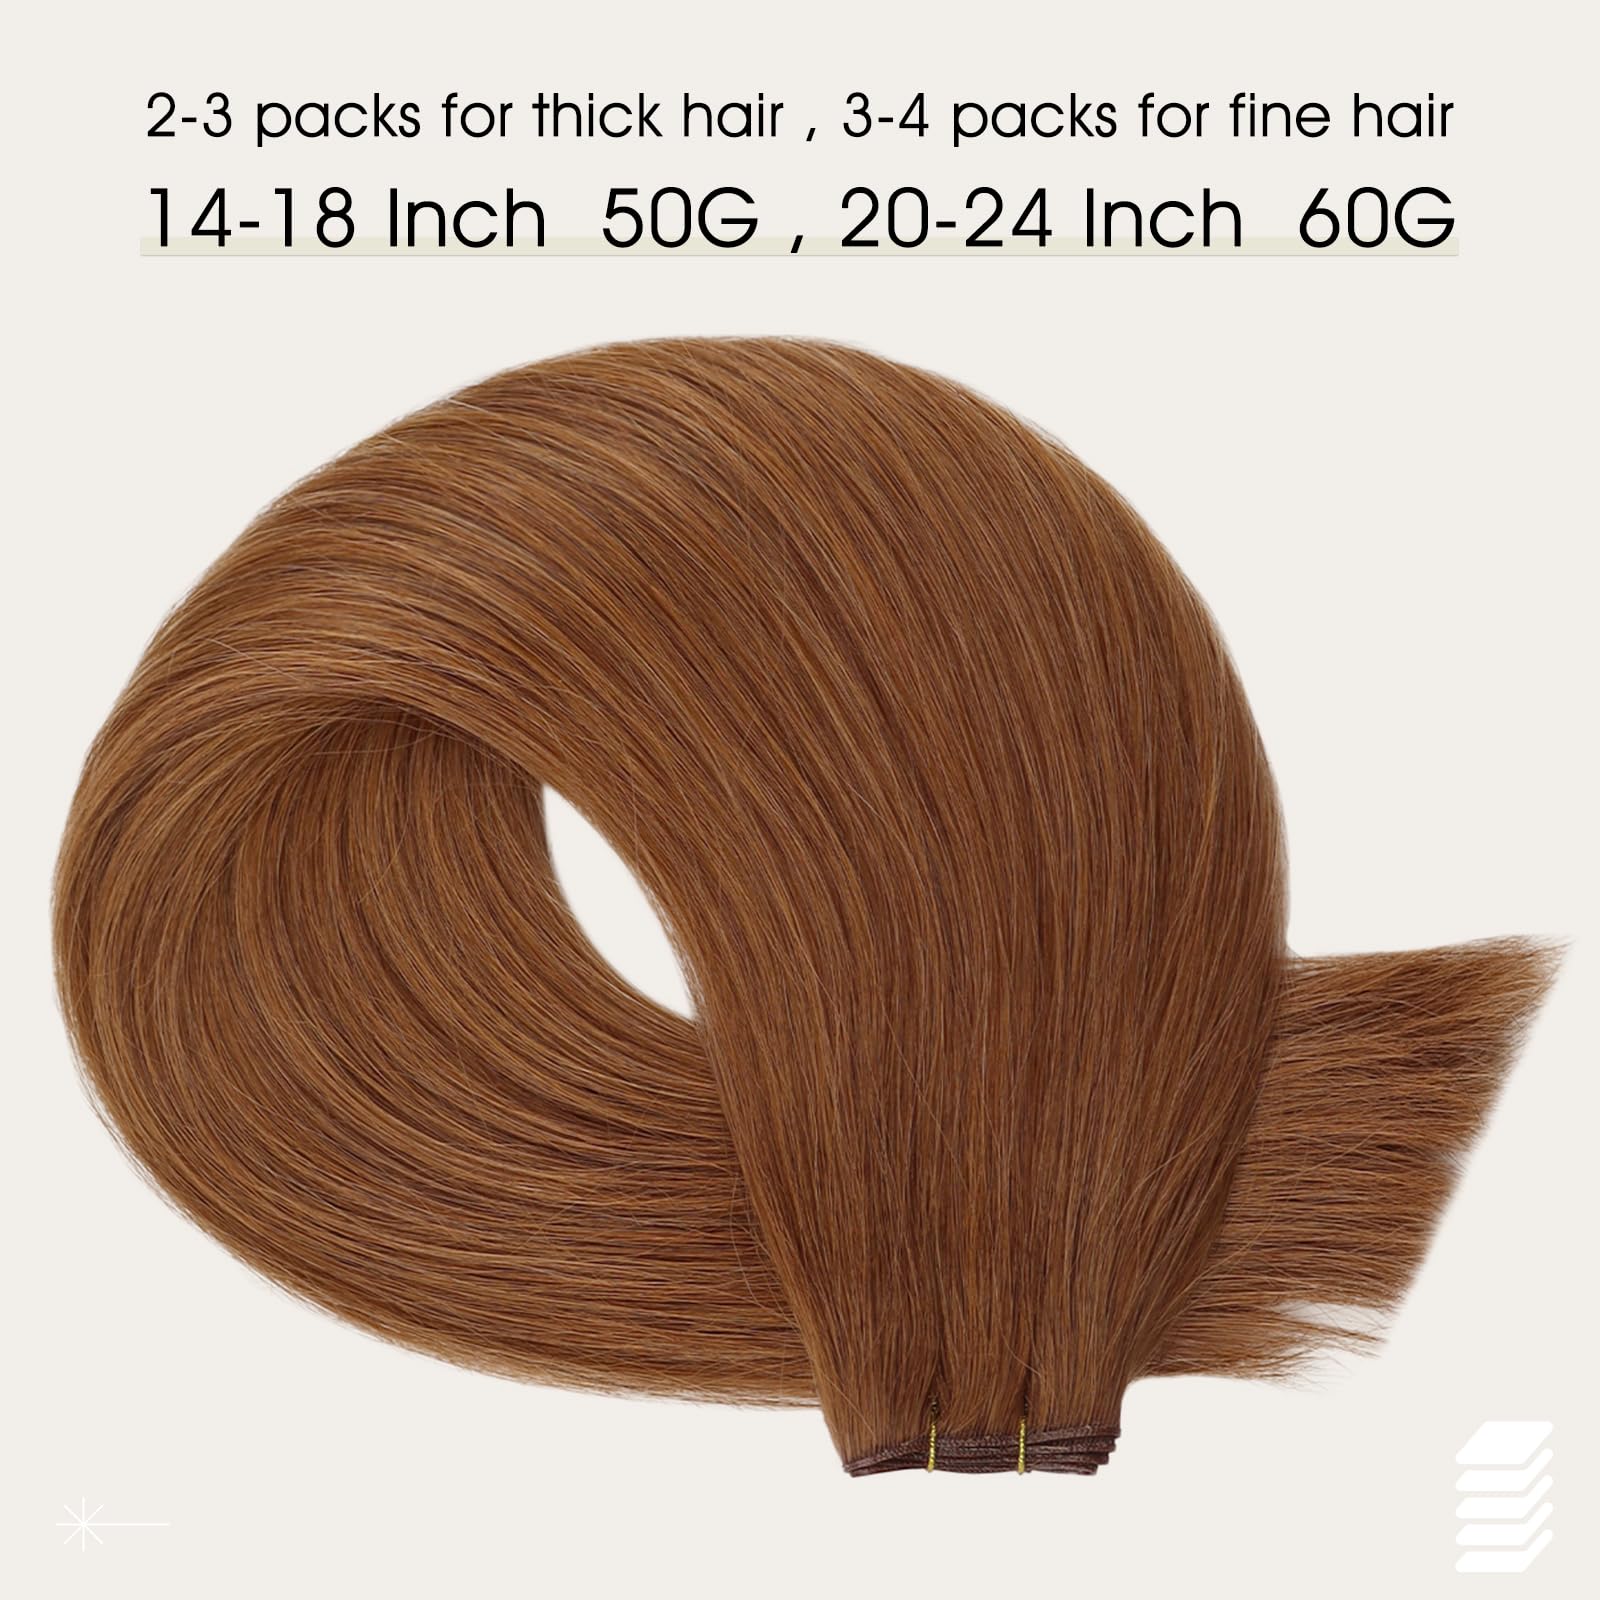 Full Shine Genius Weft Hair Extensions Hand Tied Hair Extensions Real Human Hair Copper Sew In Weft Hair Extensions For Women Invisible Weft Extensions Remy Hair 20 Inch 60G